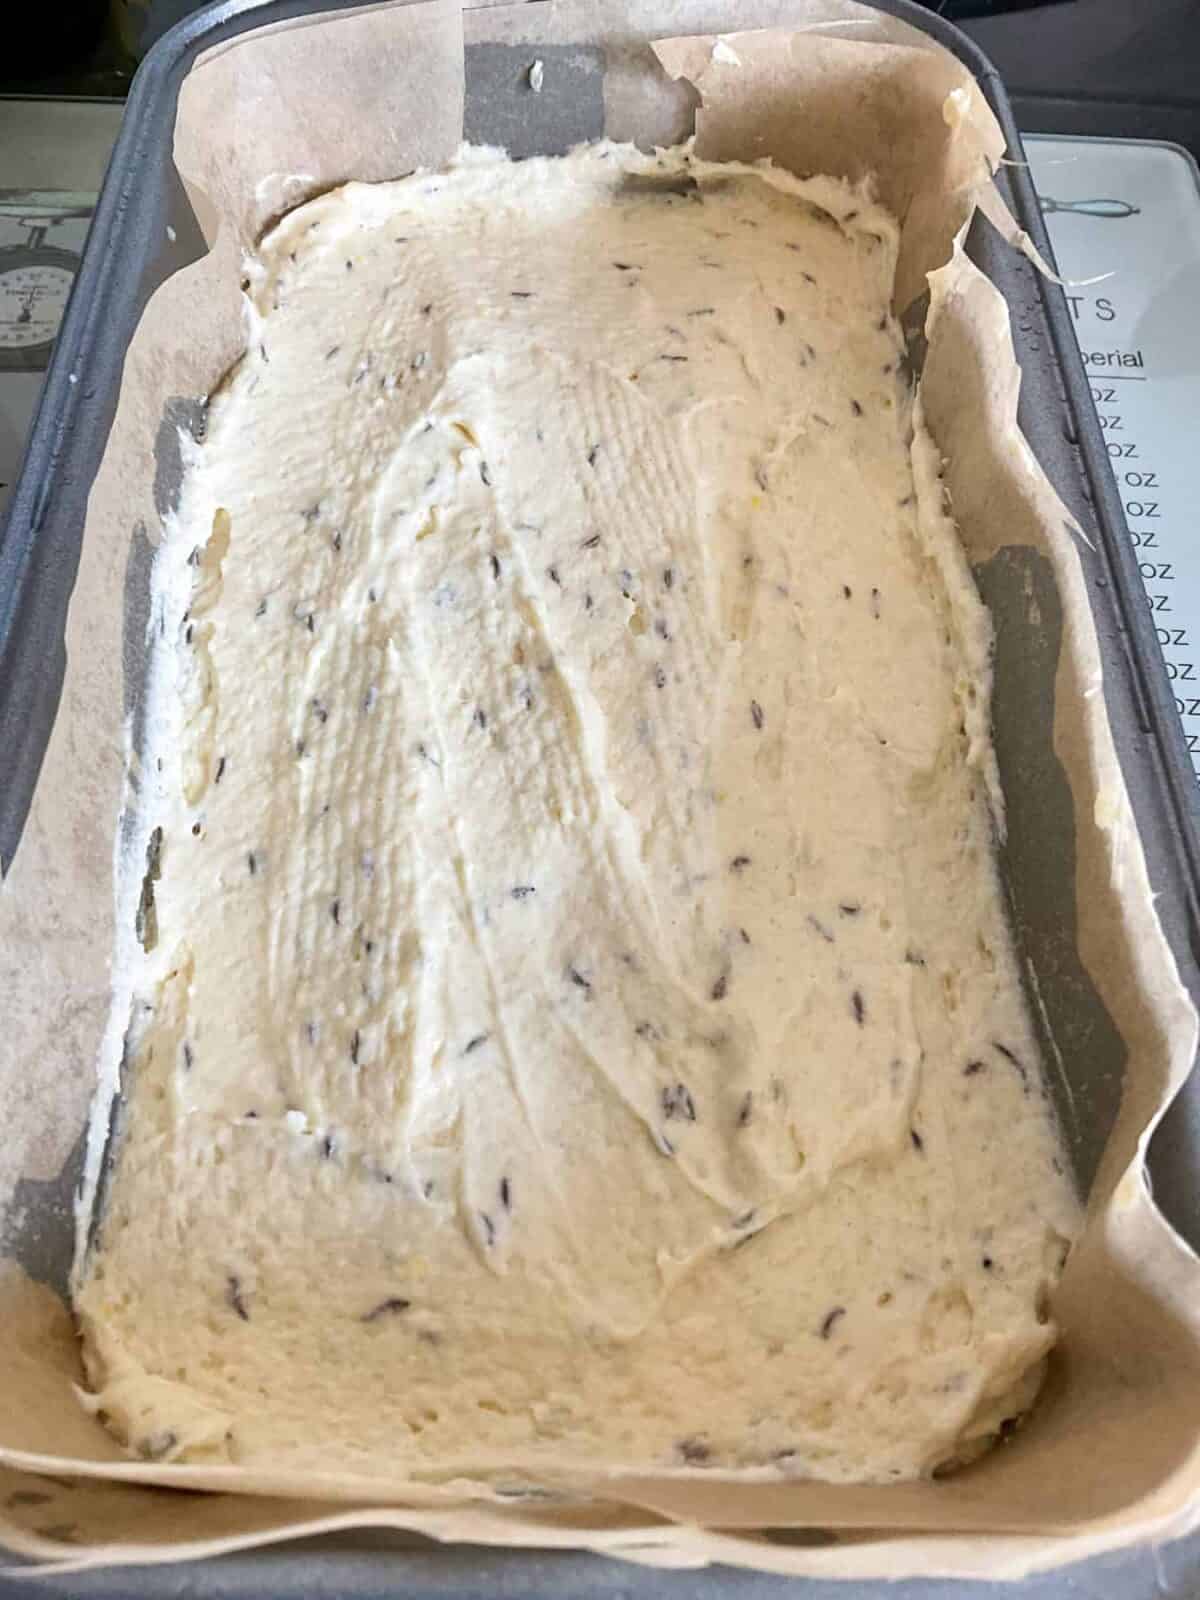 Seed cake mixture scooped into lined baking pan.